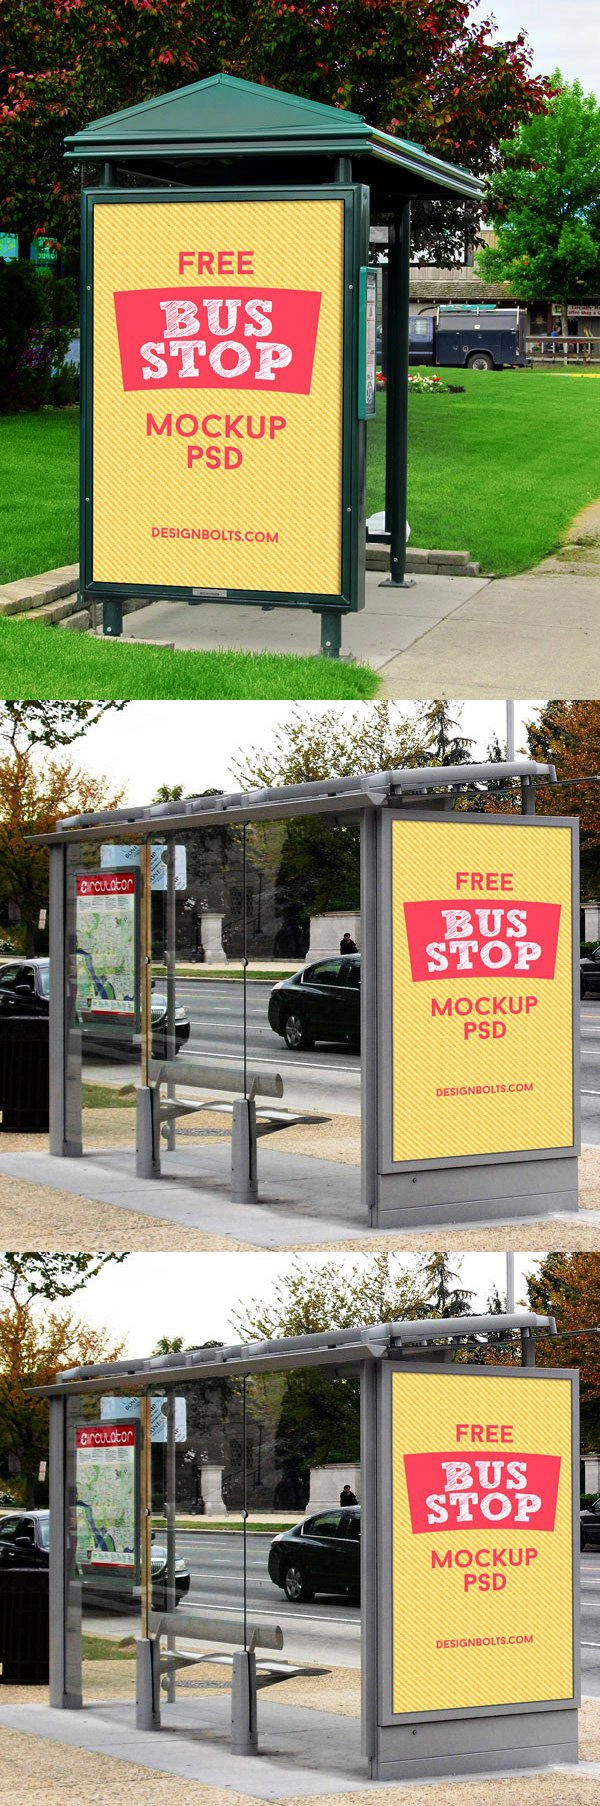 3 Free HQ Outdoor Advertising Bus Stop Mockup PSD